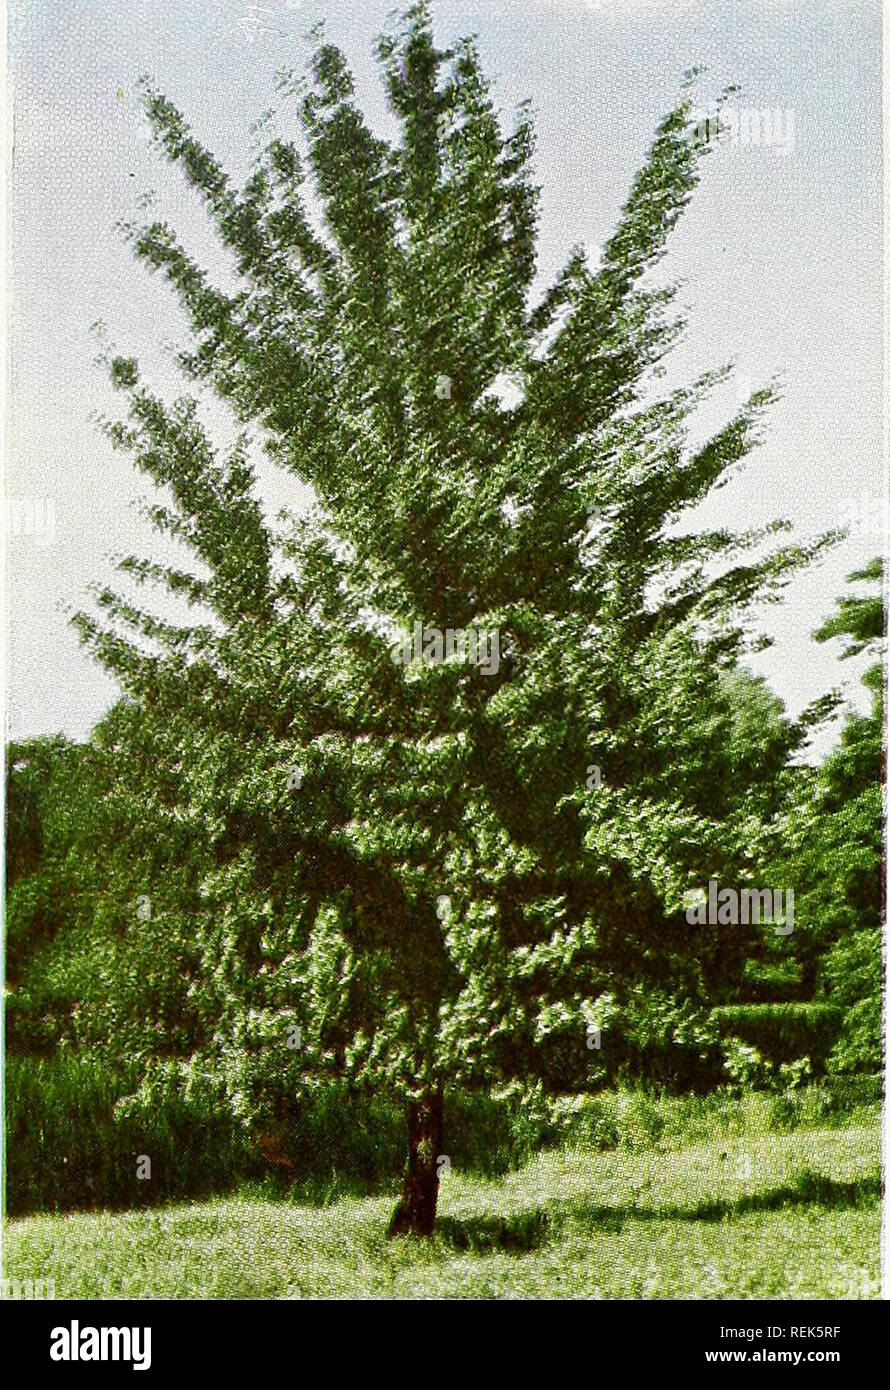 . C. M. Hobbs &amp; Sons. Nurseries Horticulture Catalogs; Evergreens Catalogs; Fruit trees Catalogs; Climbing plants Catalogs; Shrubs Catalogs; Vegetables Catalogs. C. M. HOBBS &amp; SONS, Inc.. MIMOSA - Silk Tree A rather small ornamental tree that grows rapidly under a variety of soil conditions. Graceful fern-like leaves and pink flowers in clusters at the end of the branches in May and June. OAK - Que re us PIN OAK (Q. palustris). One of the finest and most graceful as well as beautiful of all the shade trees. Very symmetrical, the branches grow horizontally from a central trunk and the l Stock Photo